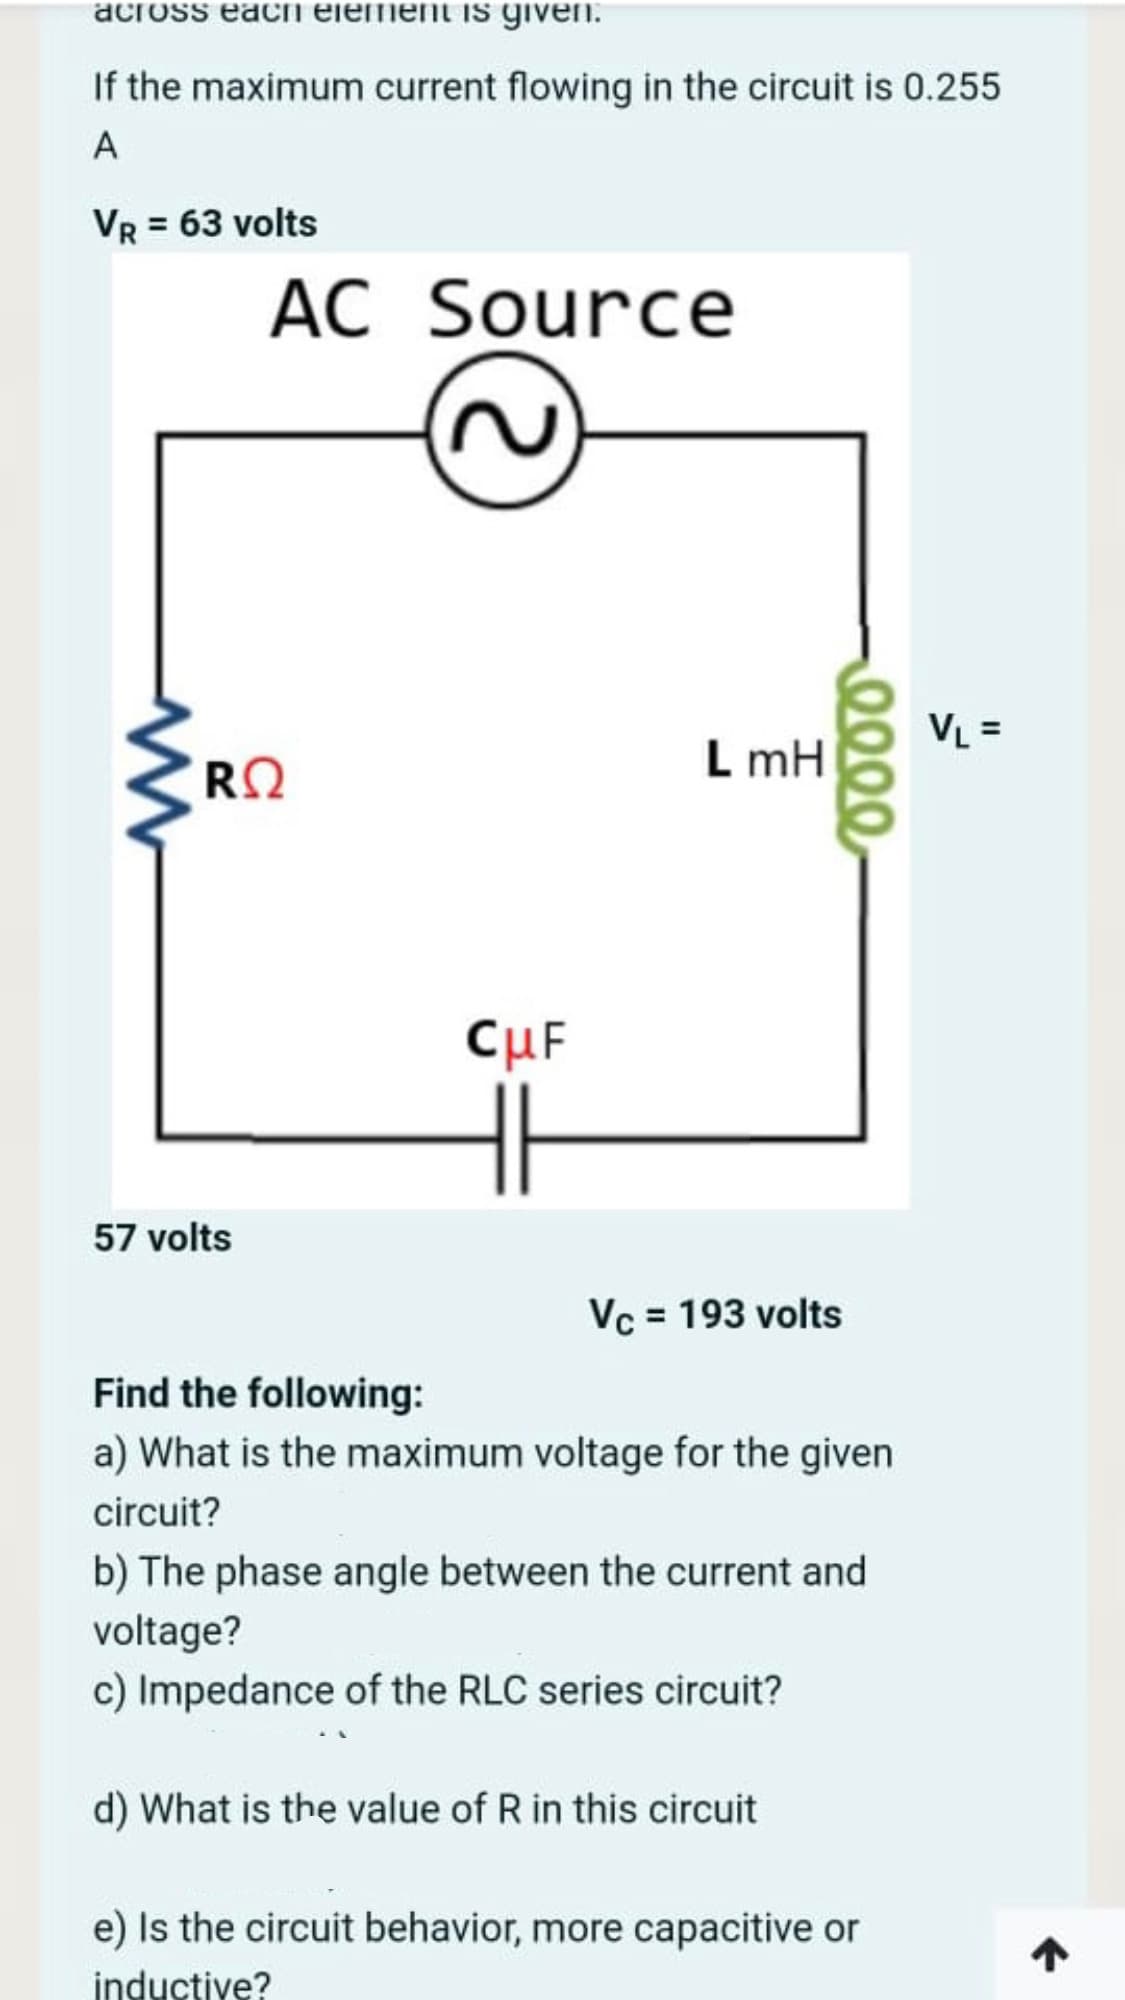 across eachi element is given.
If the maximum current flowing in the circuit is 0.255
A
VR = 63 volts
AC Source
VL =
RO
L mH
CuF
57 volts
Vc = 193 volts
Find the following:
a) What is the maximum voltage for the given
circuit?
b) The phase angle between the current and
voltage?
c) Impedance of the RLC series circuit?
d) What is the value of R in this circuit
e) Is the circuit behavior, more capacitive or
inductive?
